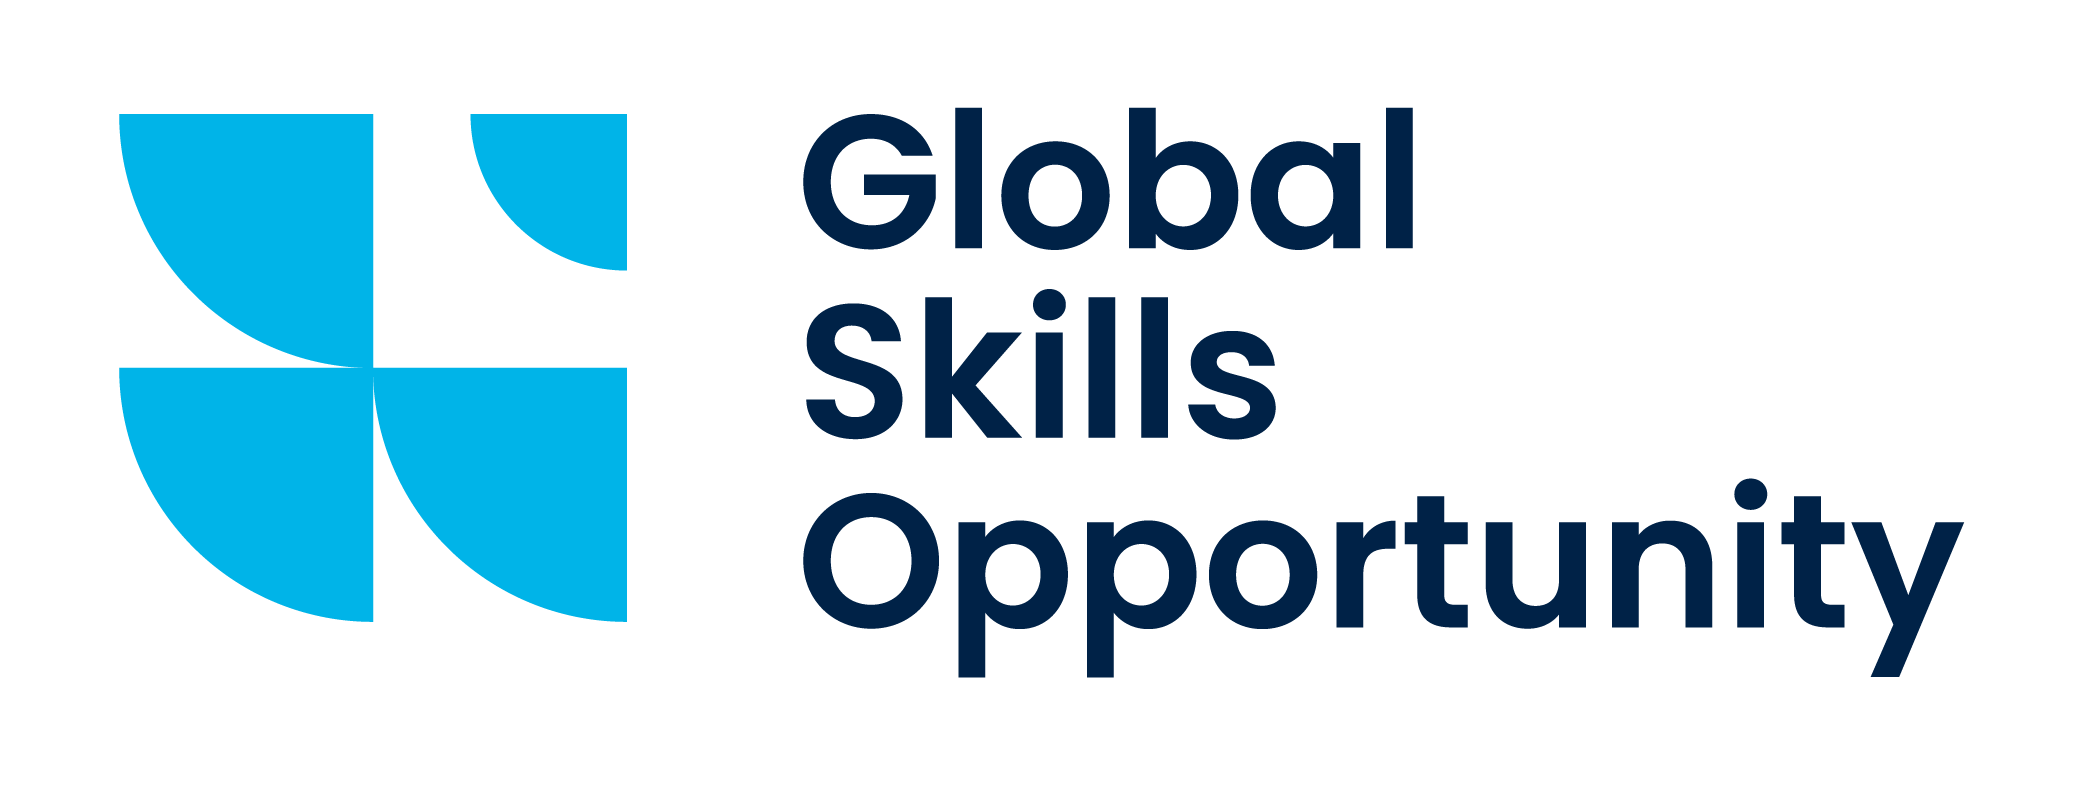 Global Skills Opportunity is a national outbound student mobility program that is expected to enable more than 16,000 Canadian college and undergraduate-level university students from across the country to acquire the global skills employers want and the 